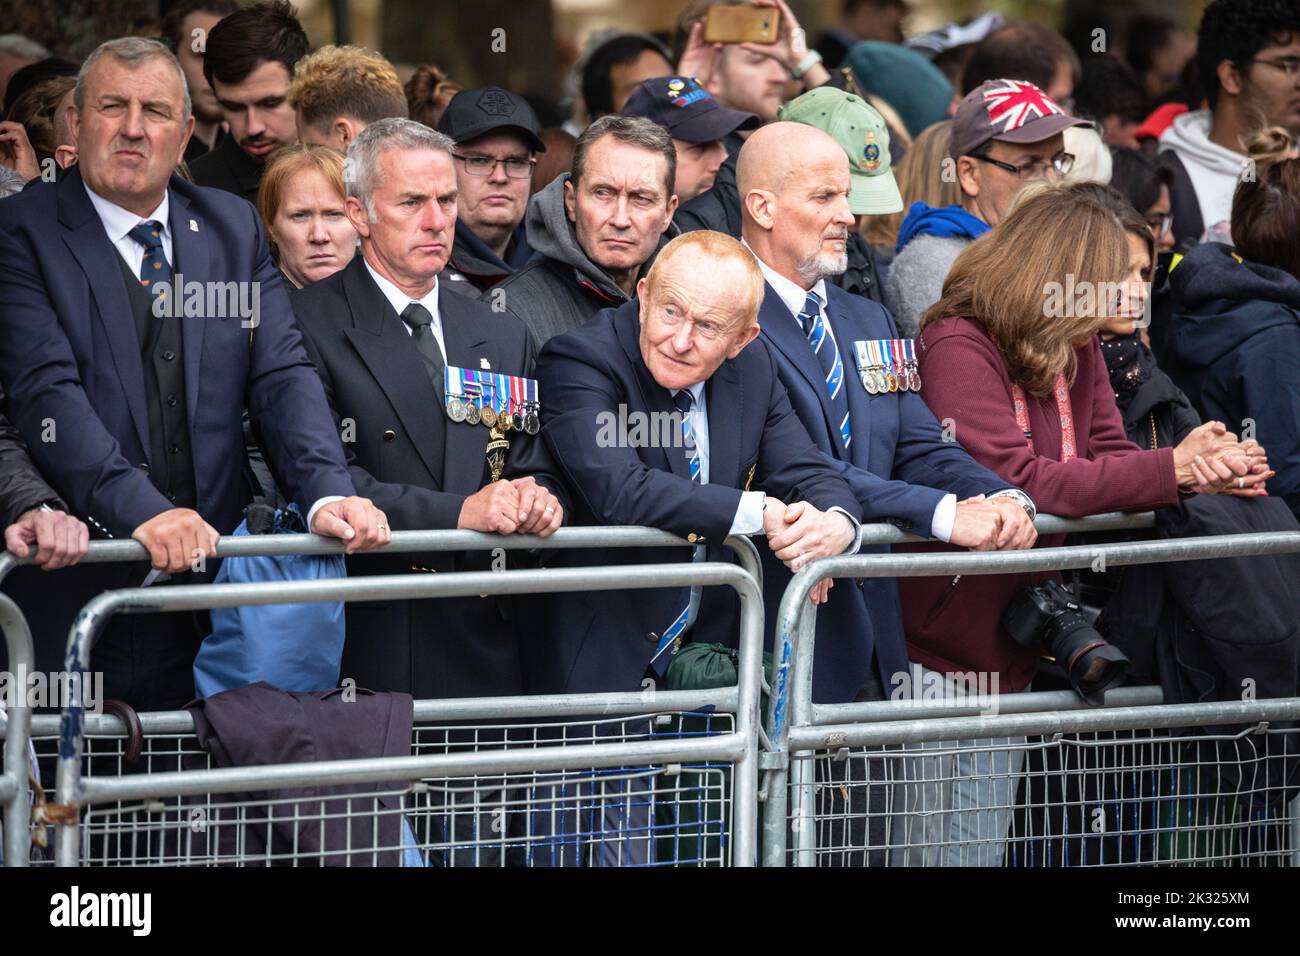 Soldiers and veterans watch the Queen Elizabeth II funeral procession in London following the Queen's death, England, United Kingdom Stock Photo